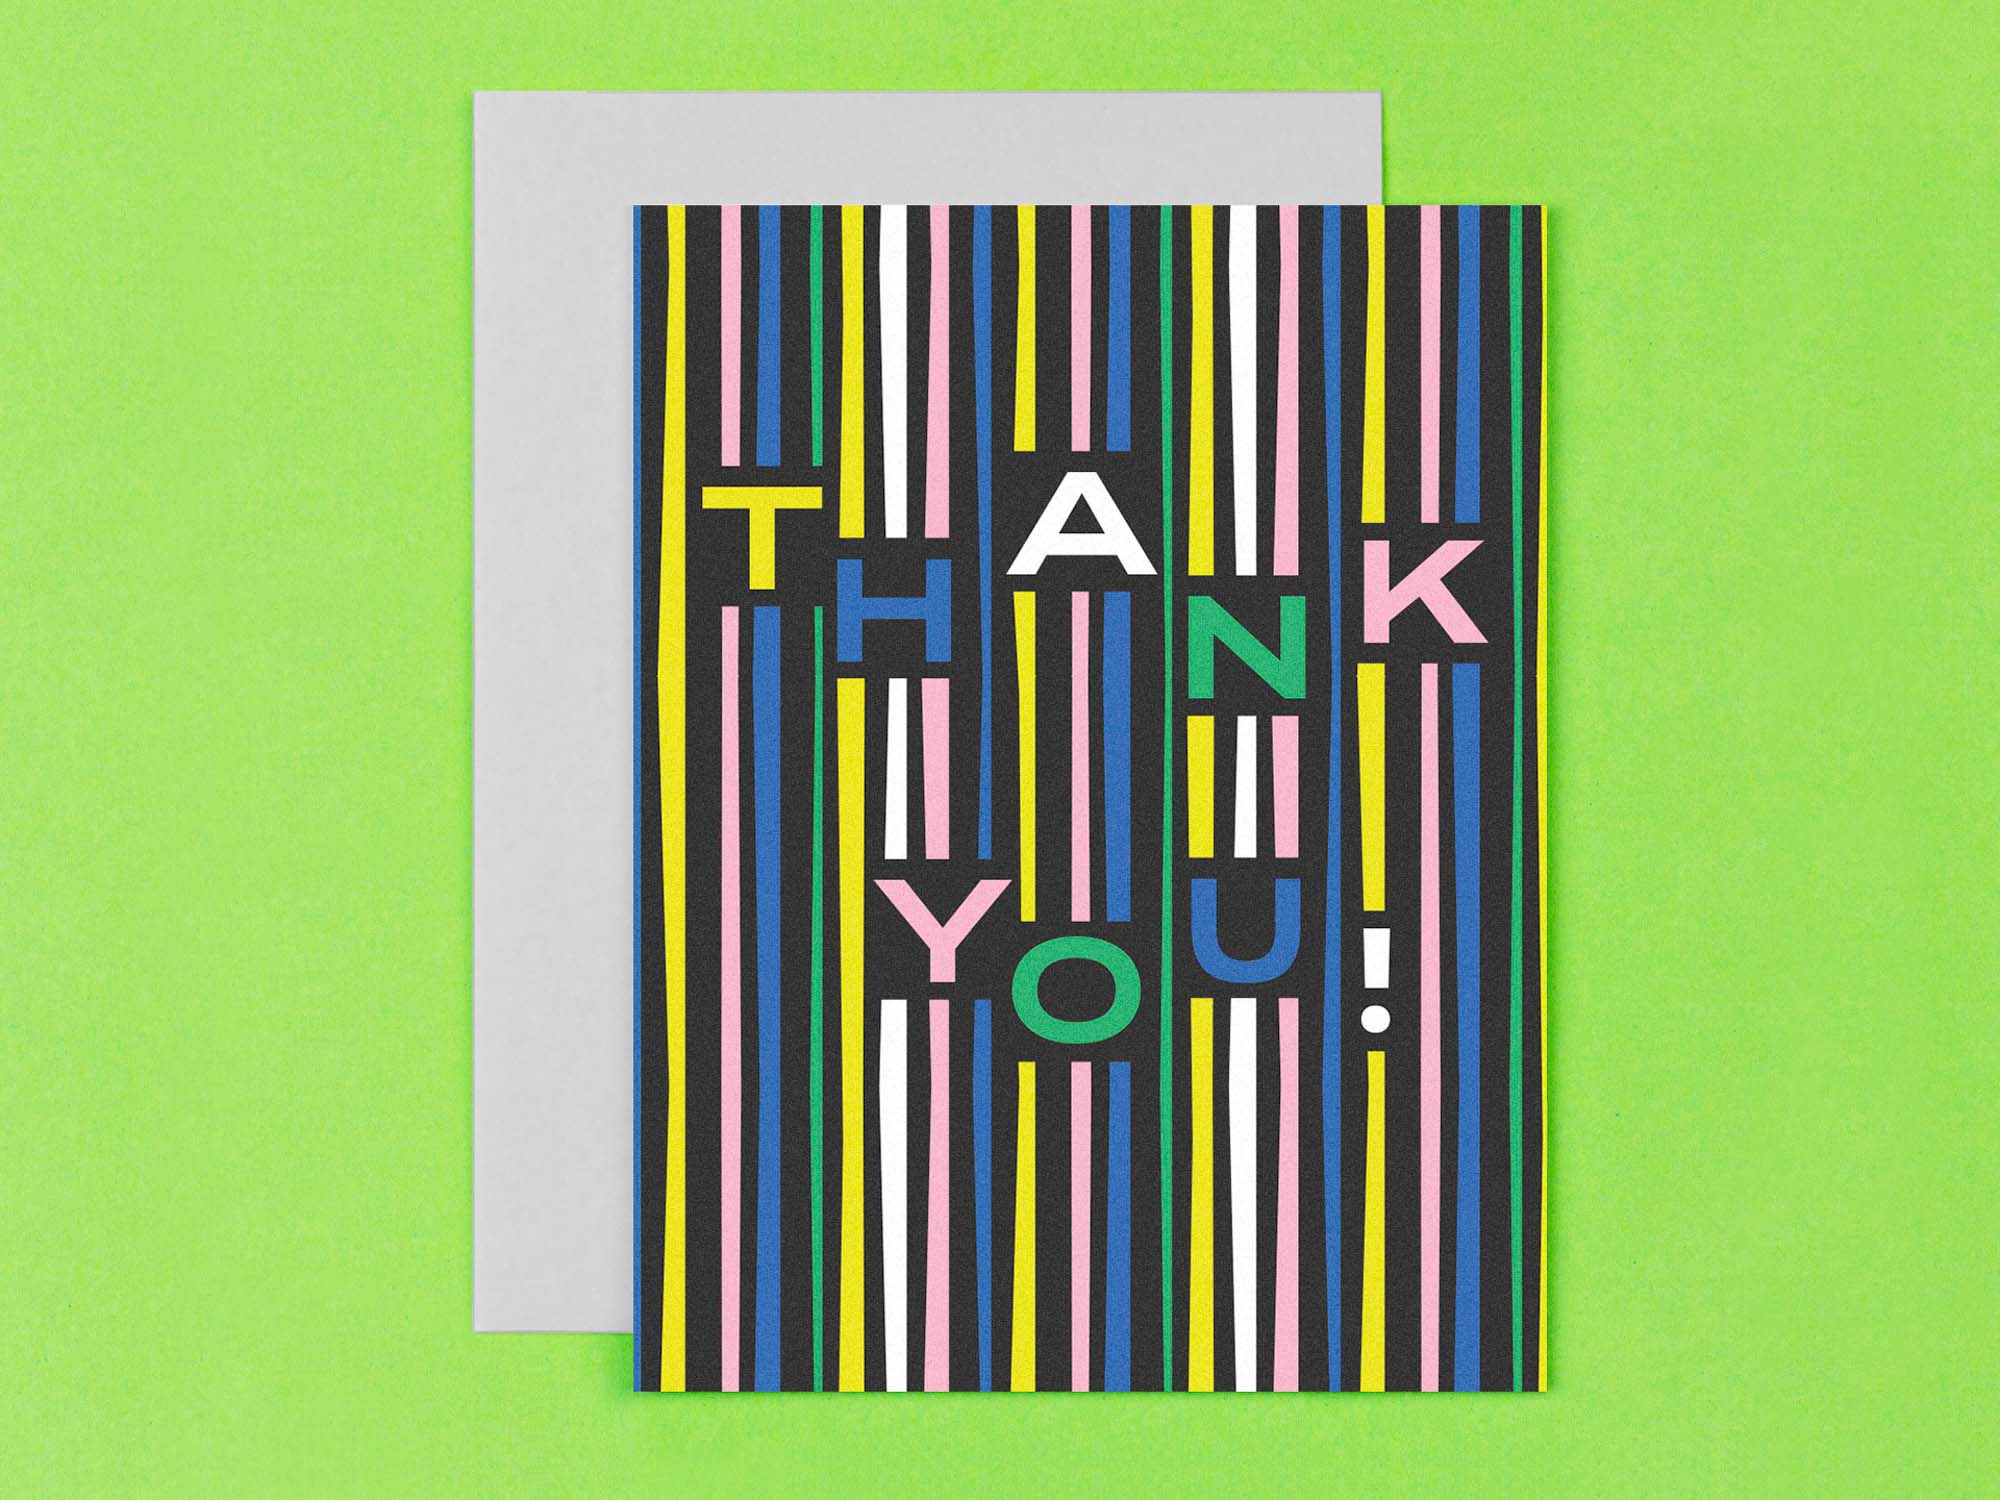 Mid-century inspired thank you card with bold typography and abstract party streamers pattern. Made in USA by @mydarlin_bk